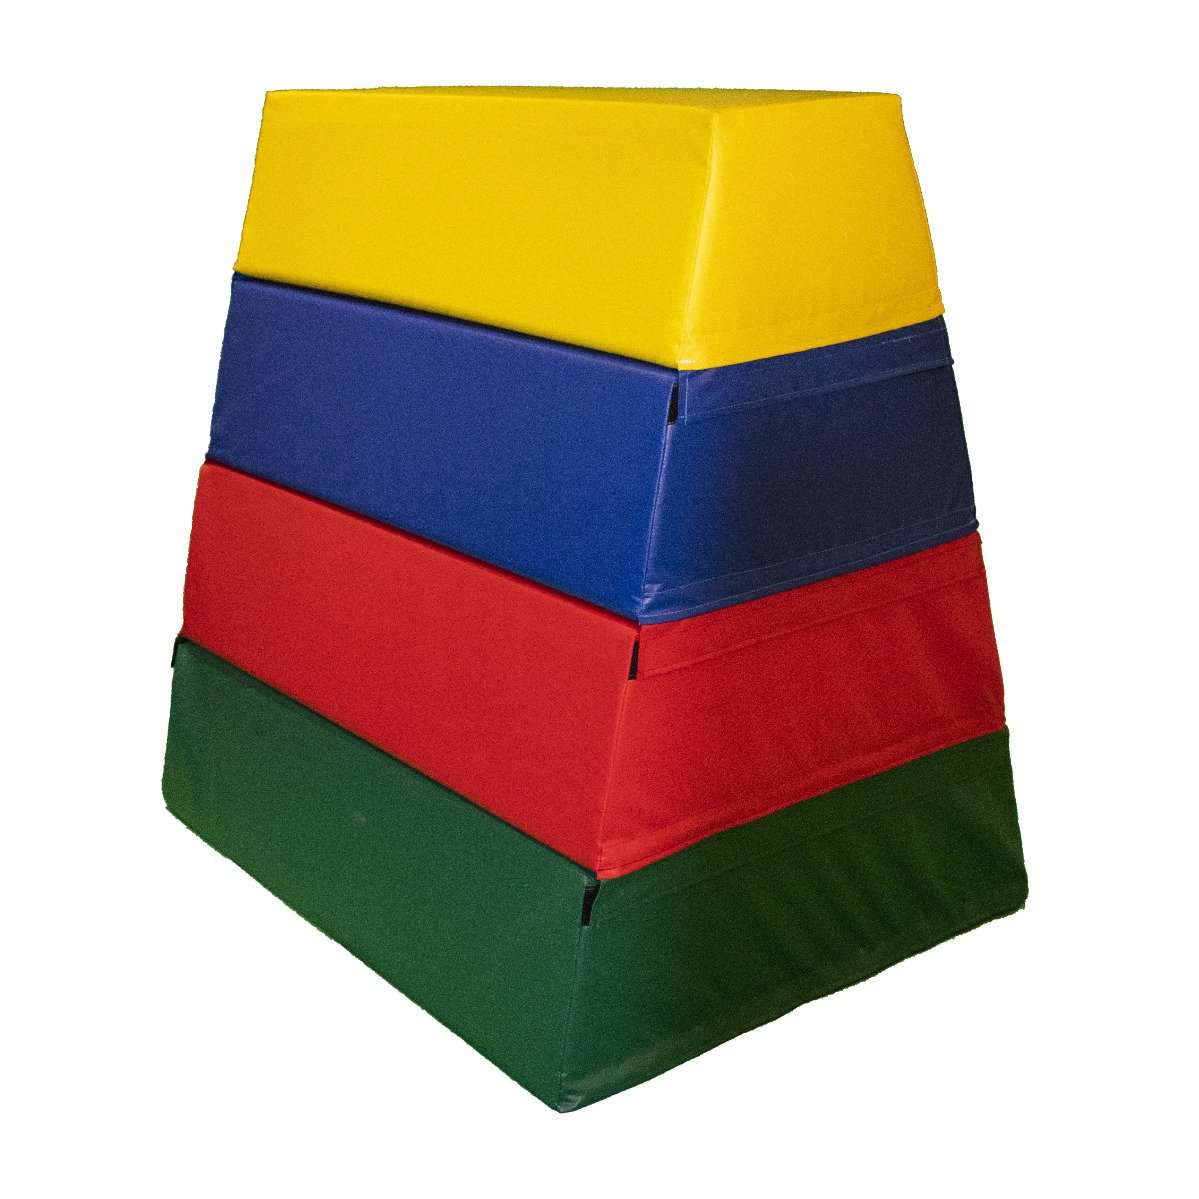 Trapezoid Vaulting Boxes for Gymnastics Training - Canada Mats